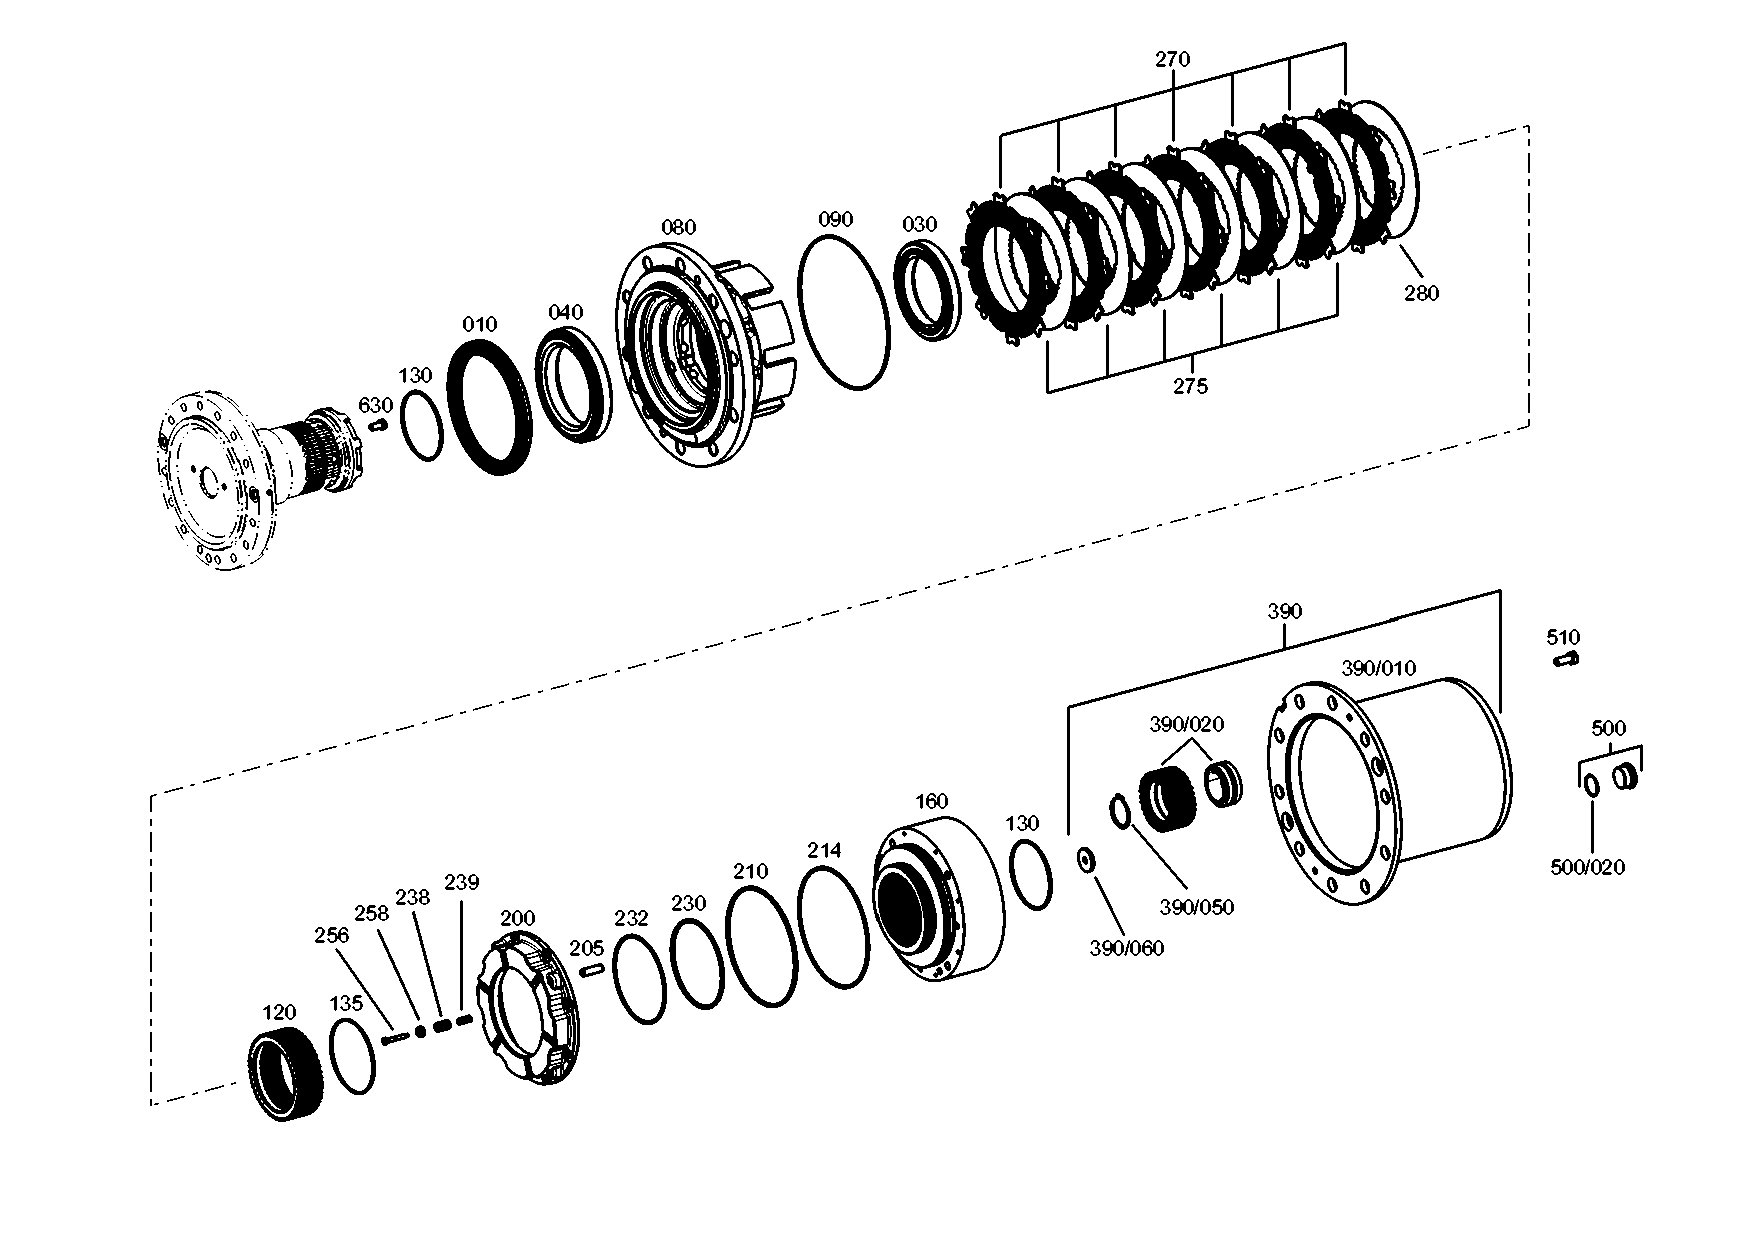 drawing for TEREX EQUIPMENT LIMITED ZGAQ-00100 - CASSETTE RING (figure 5)